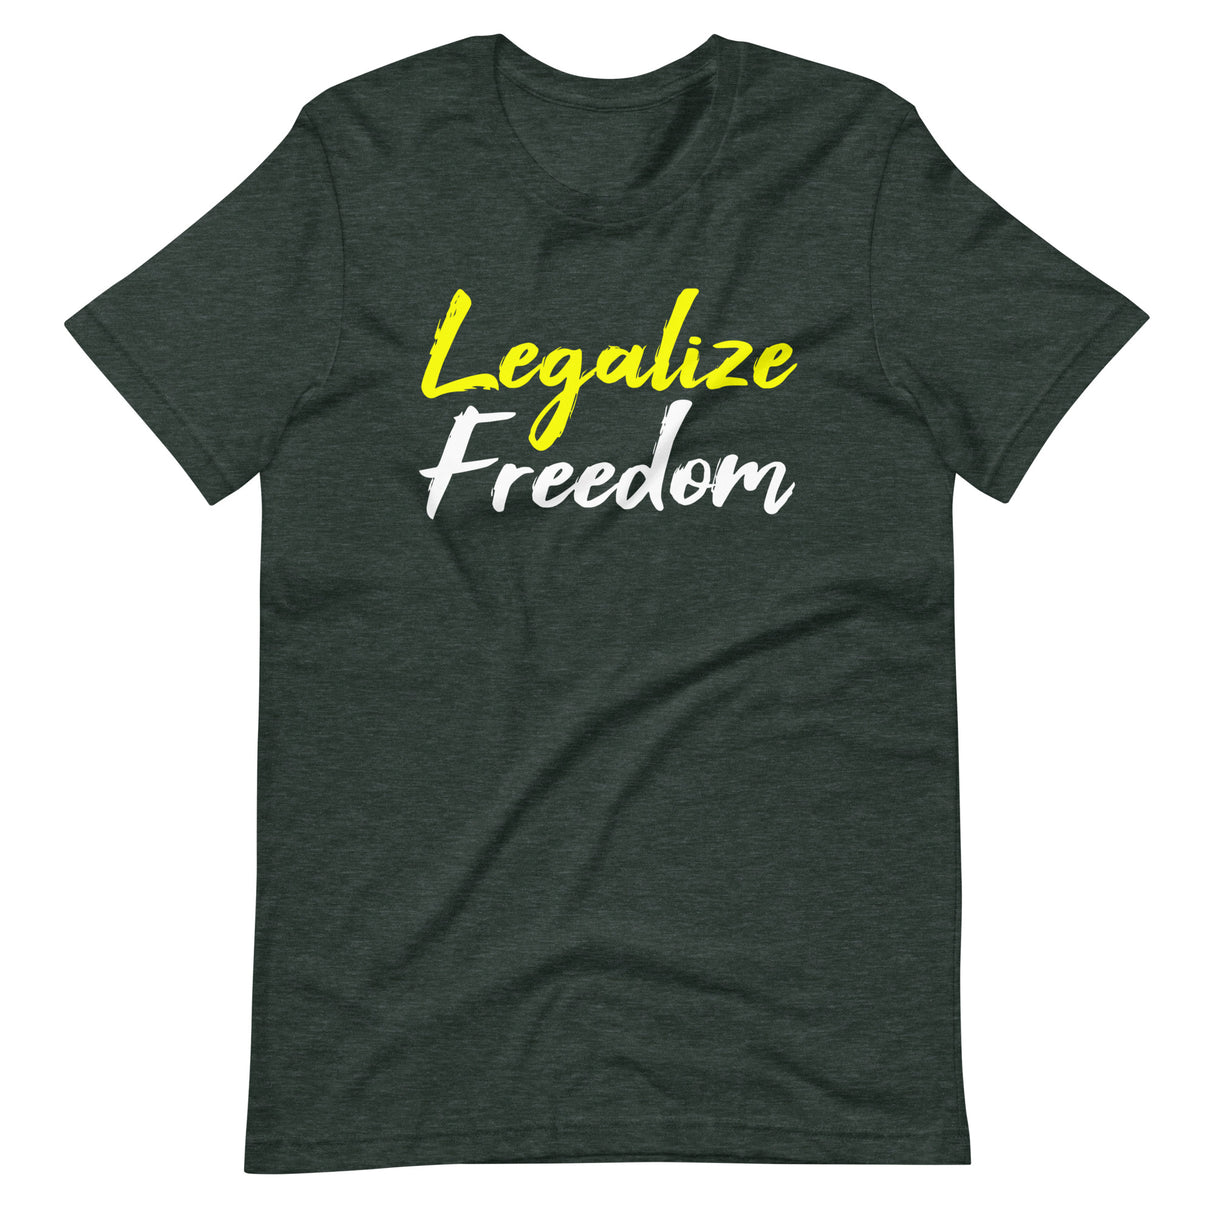 Legalize Freedom Shirt - Libertarian Country